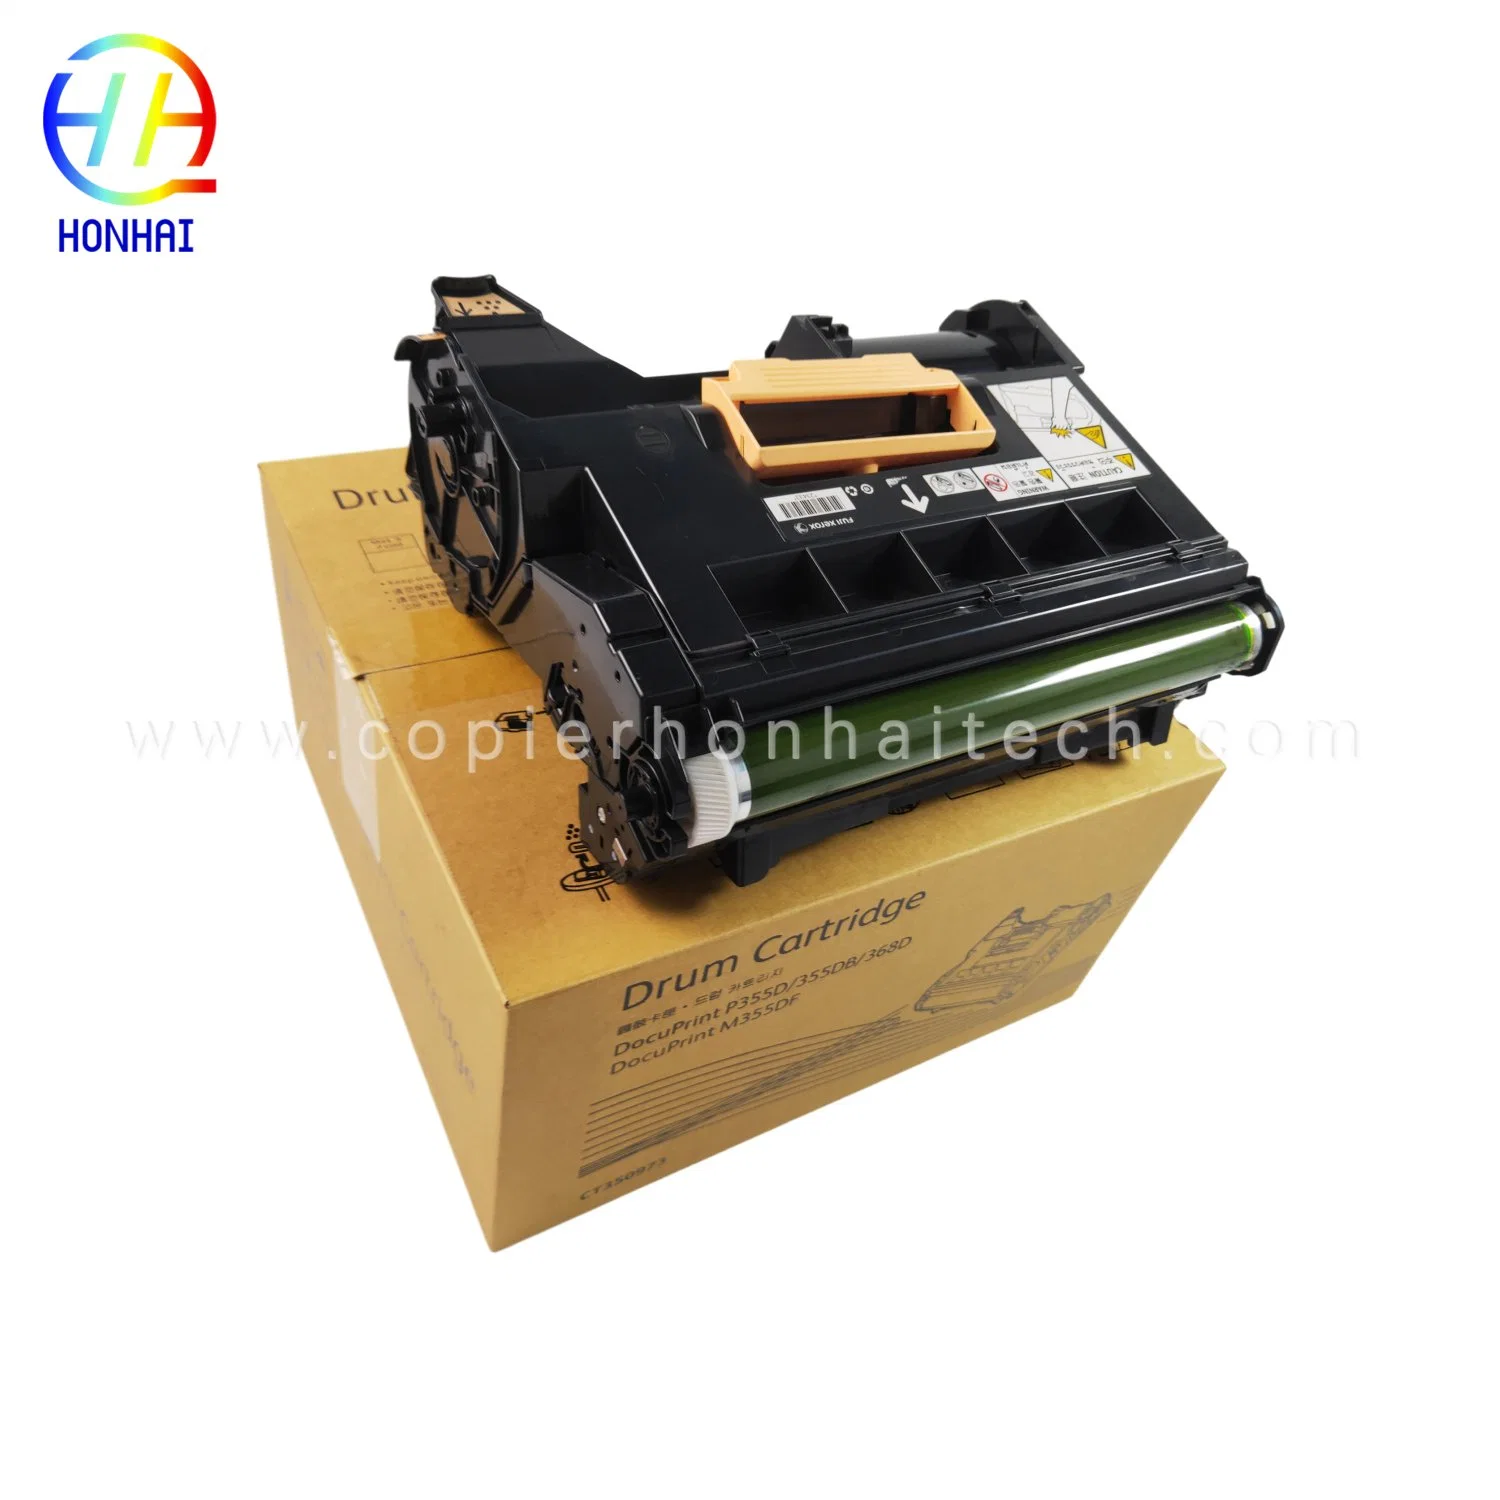 Drum Cartridge for Xerox Phaser 3610 Workcentre 3615 3655 3655I 113r00773 113r773 Drum Unit